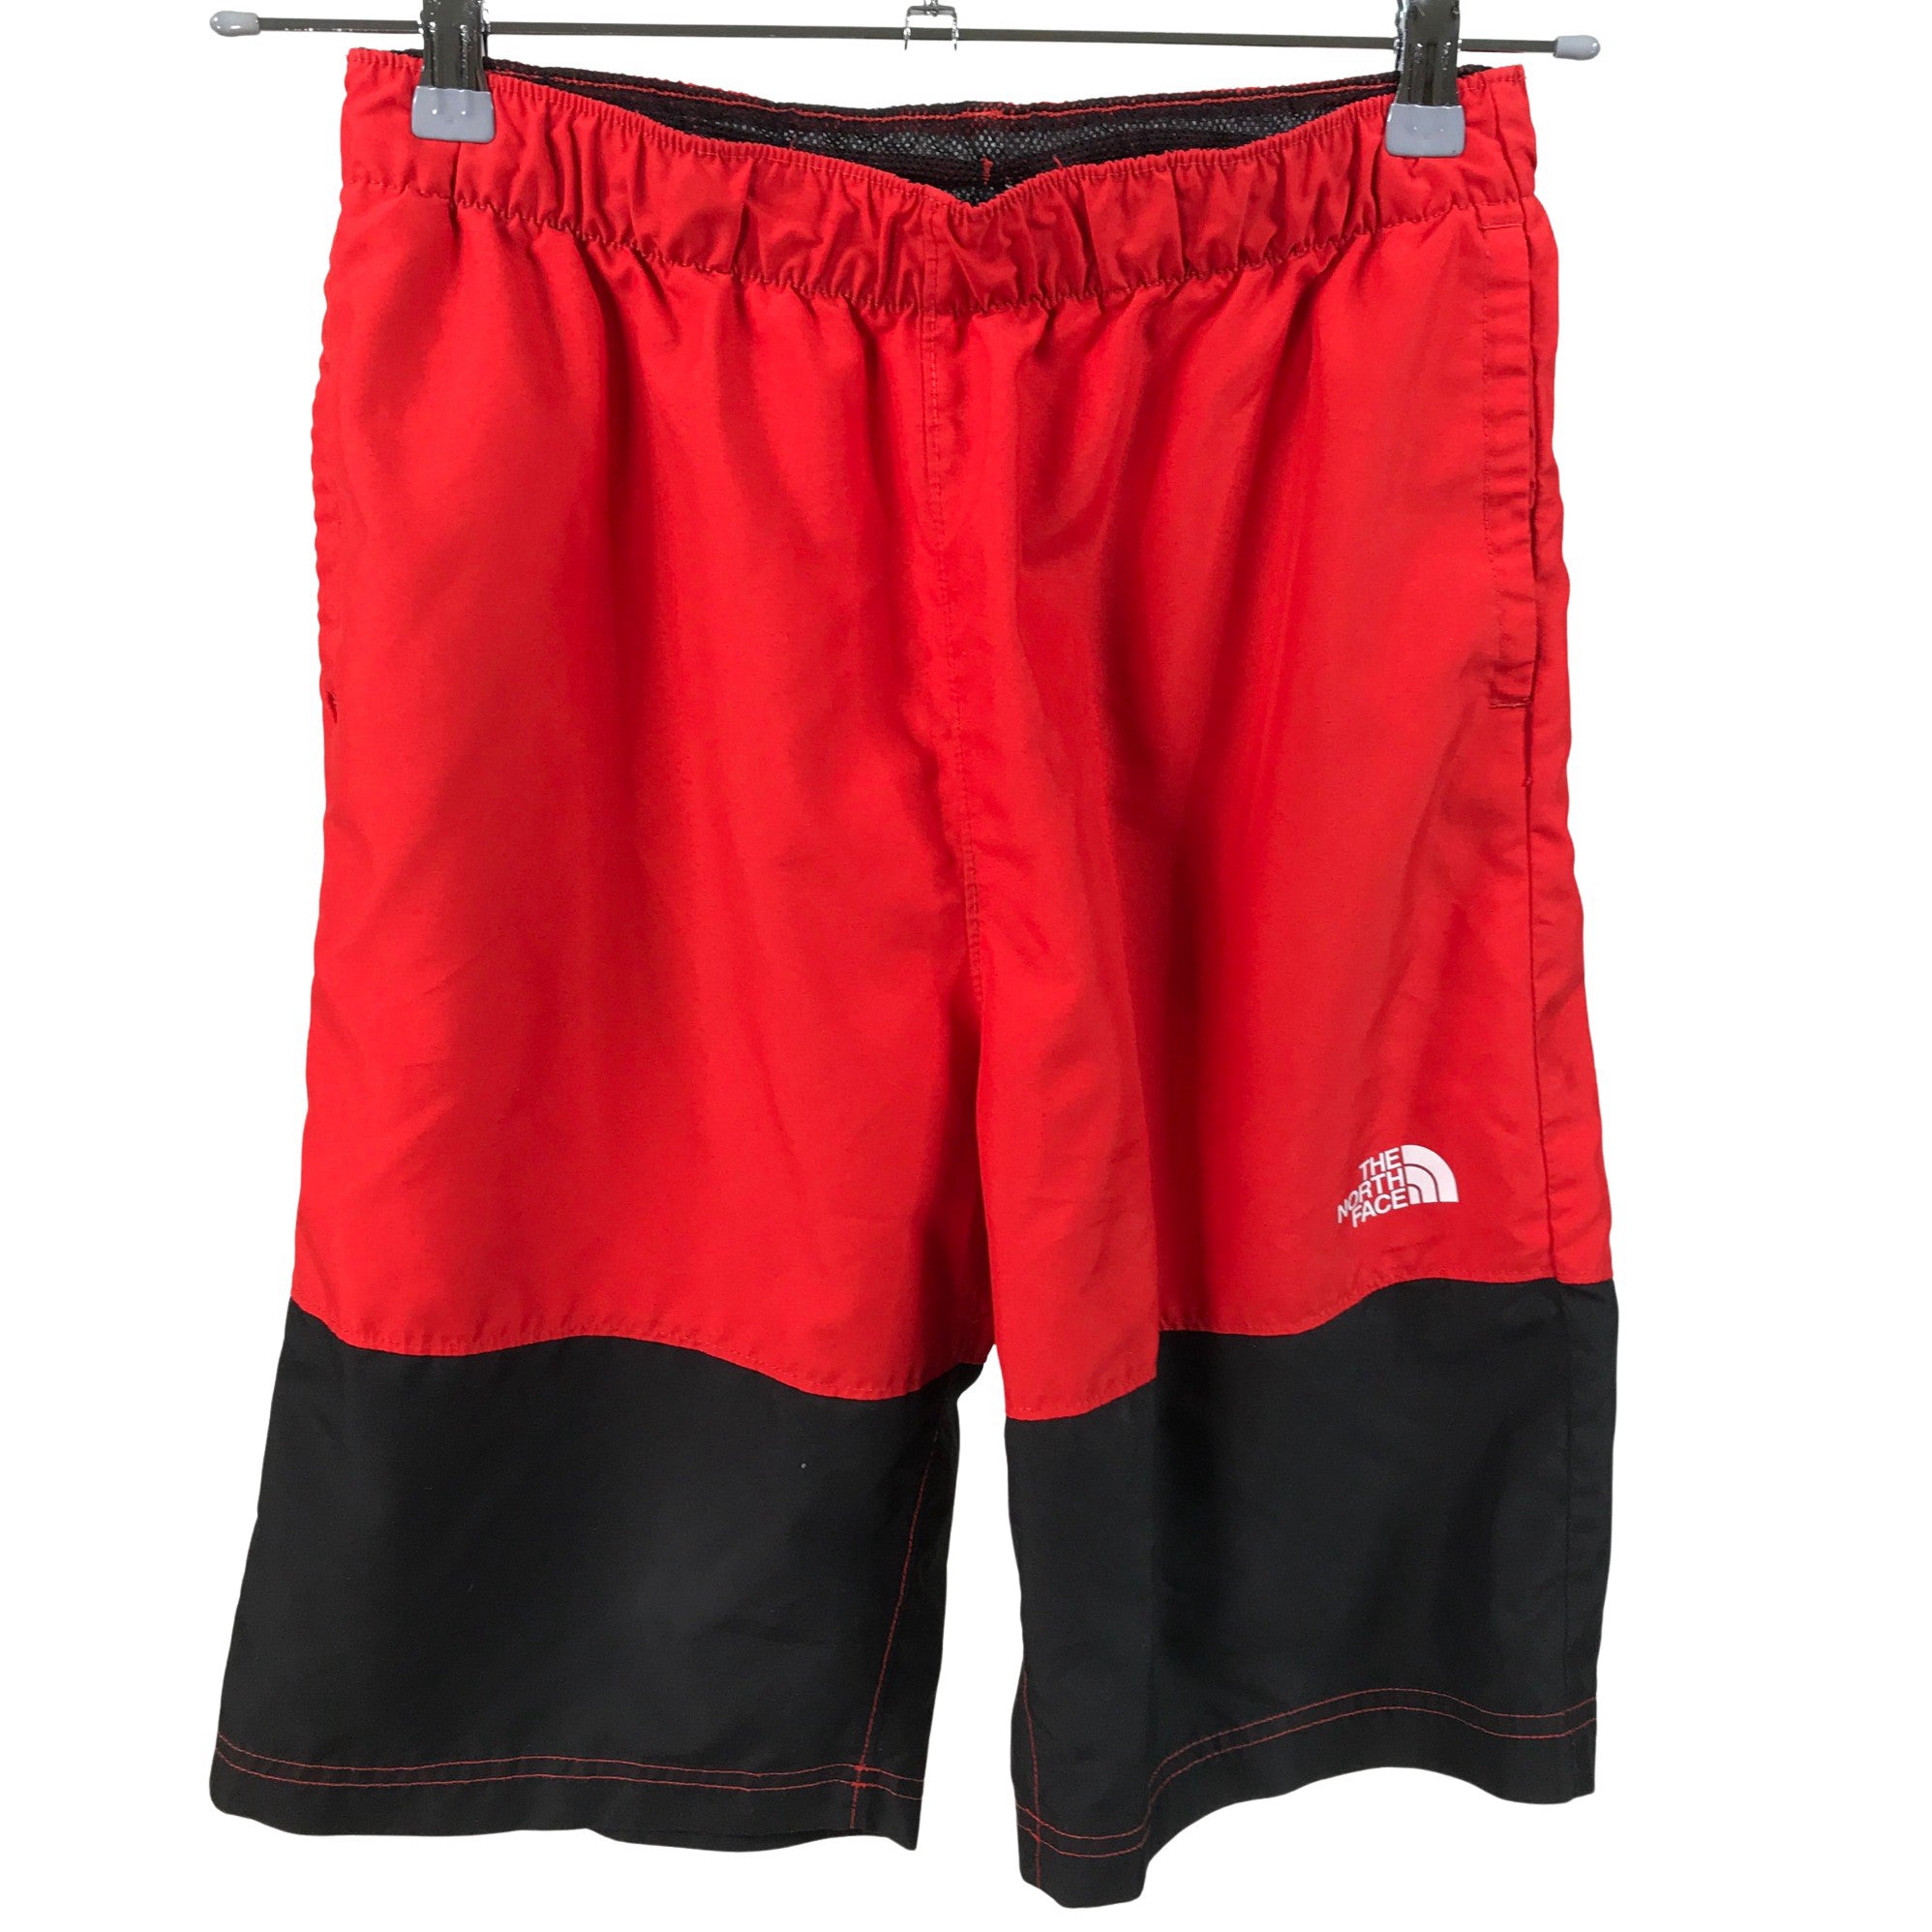 Boys' The North Face Shorts, size 170 - (Red)